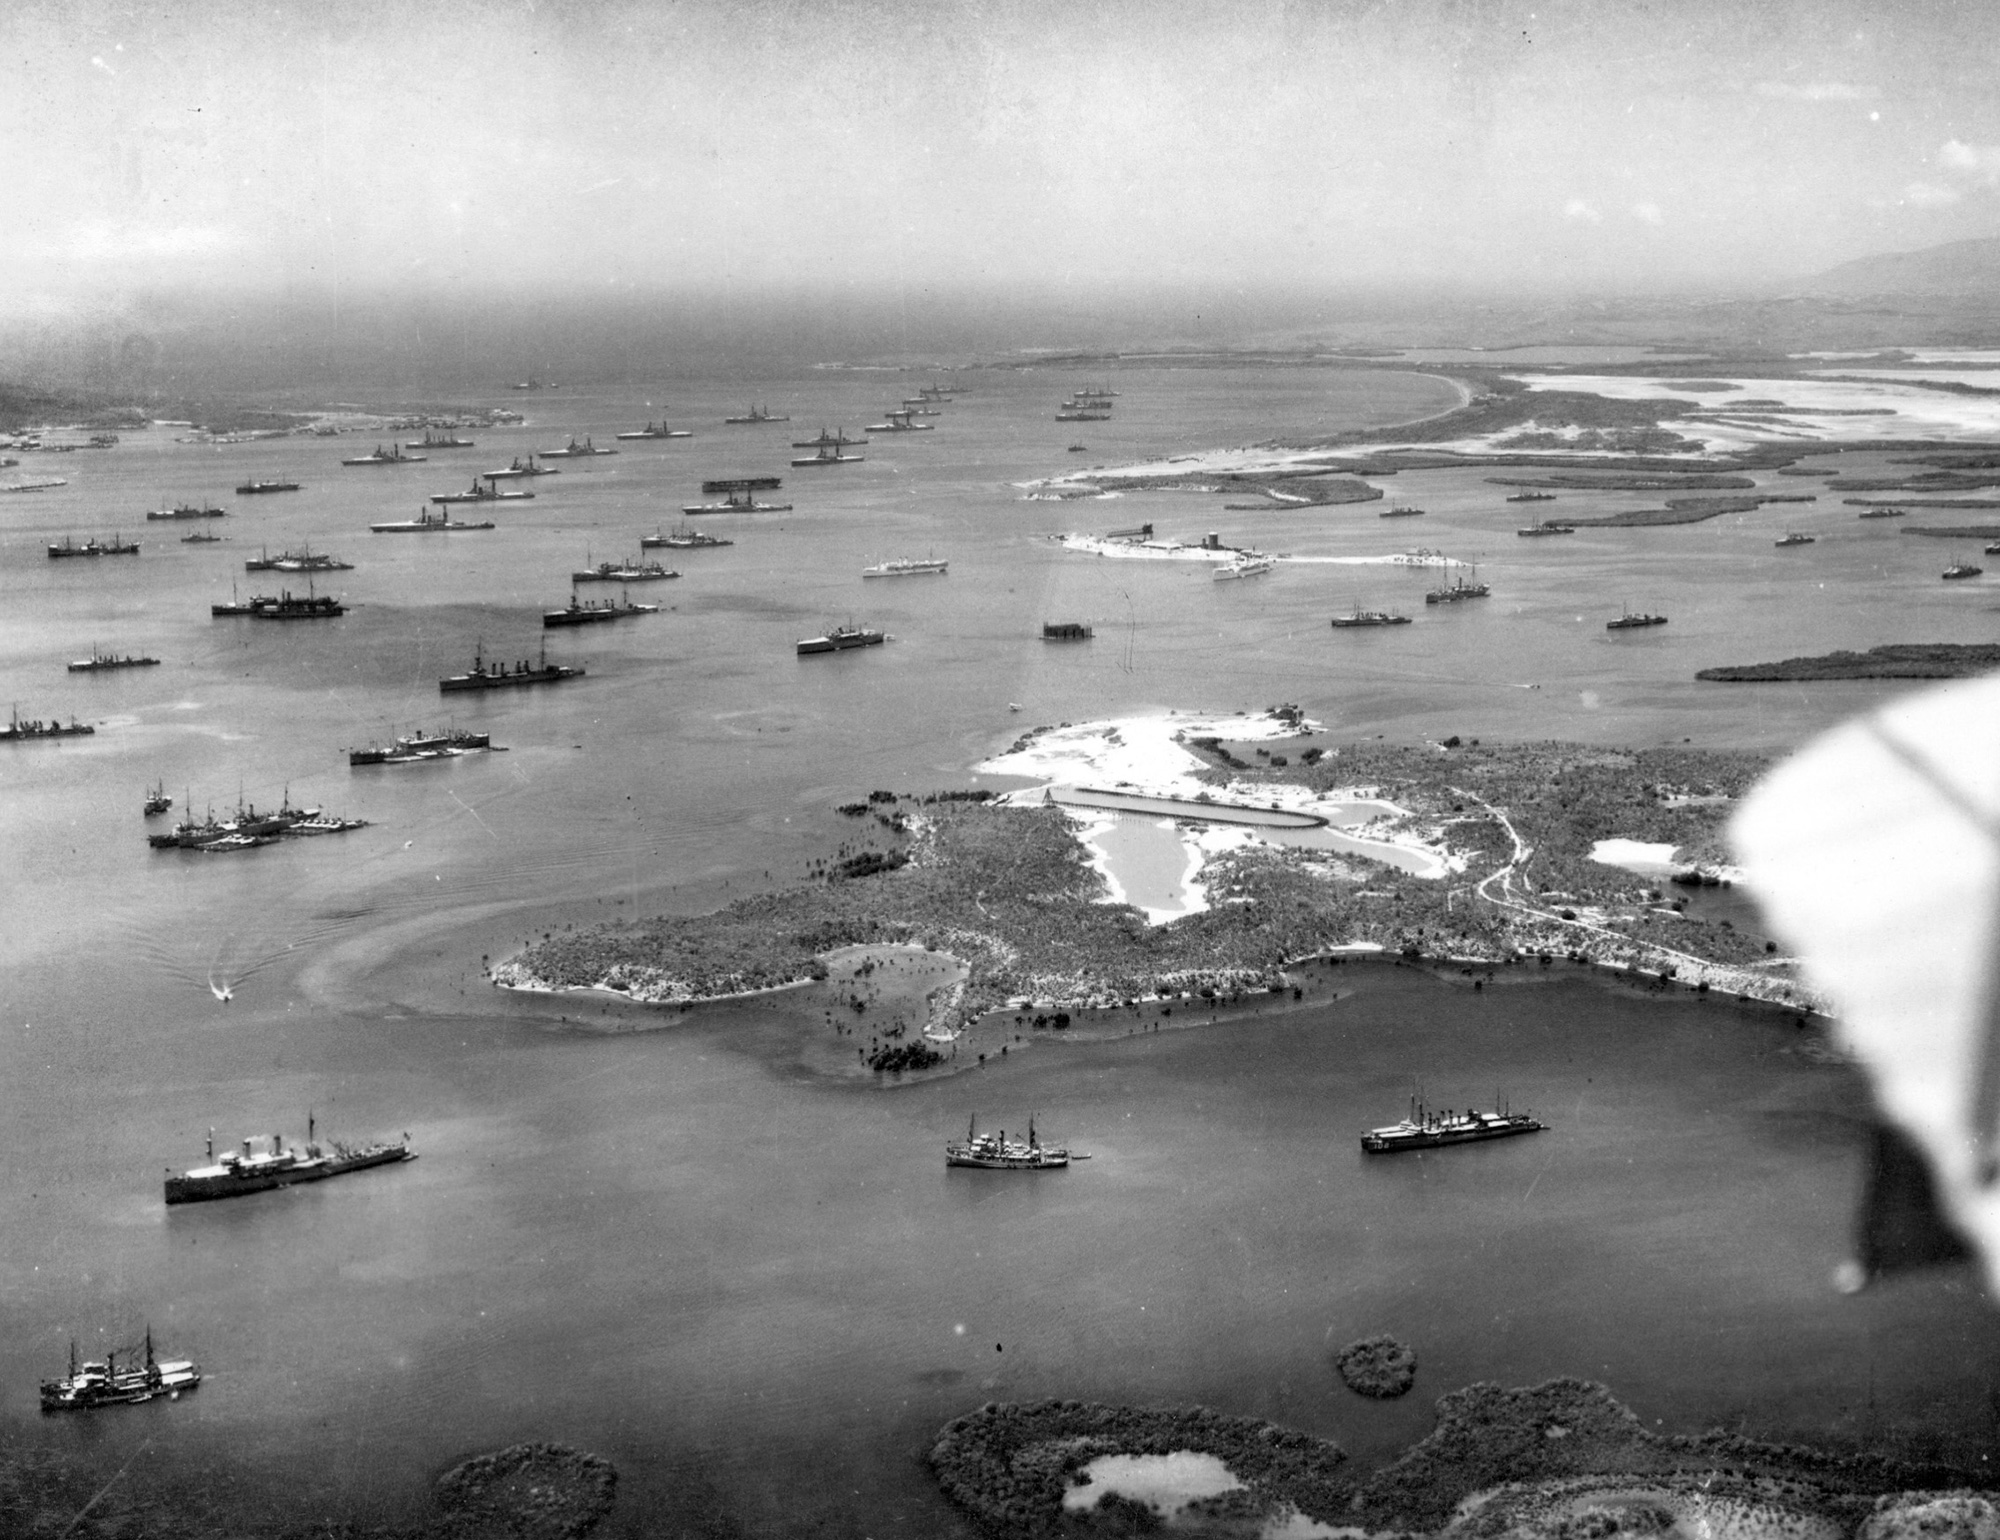 A nineteen twenty-seven aerial photograph of the United States fleet stationed at Guantánamo Bay.